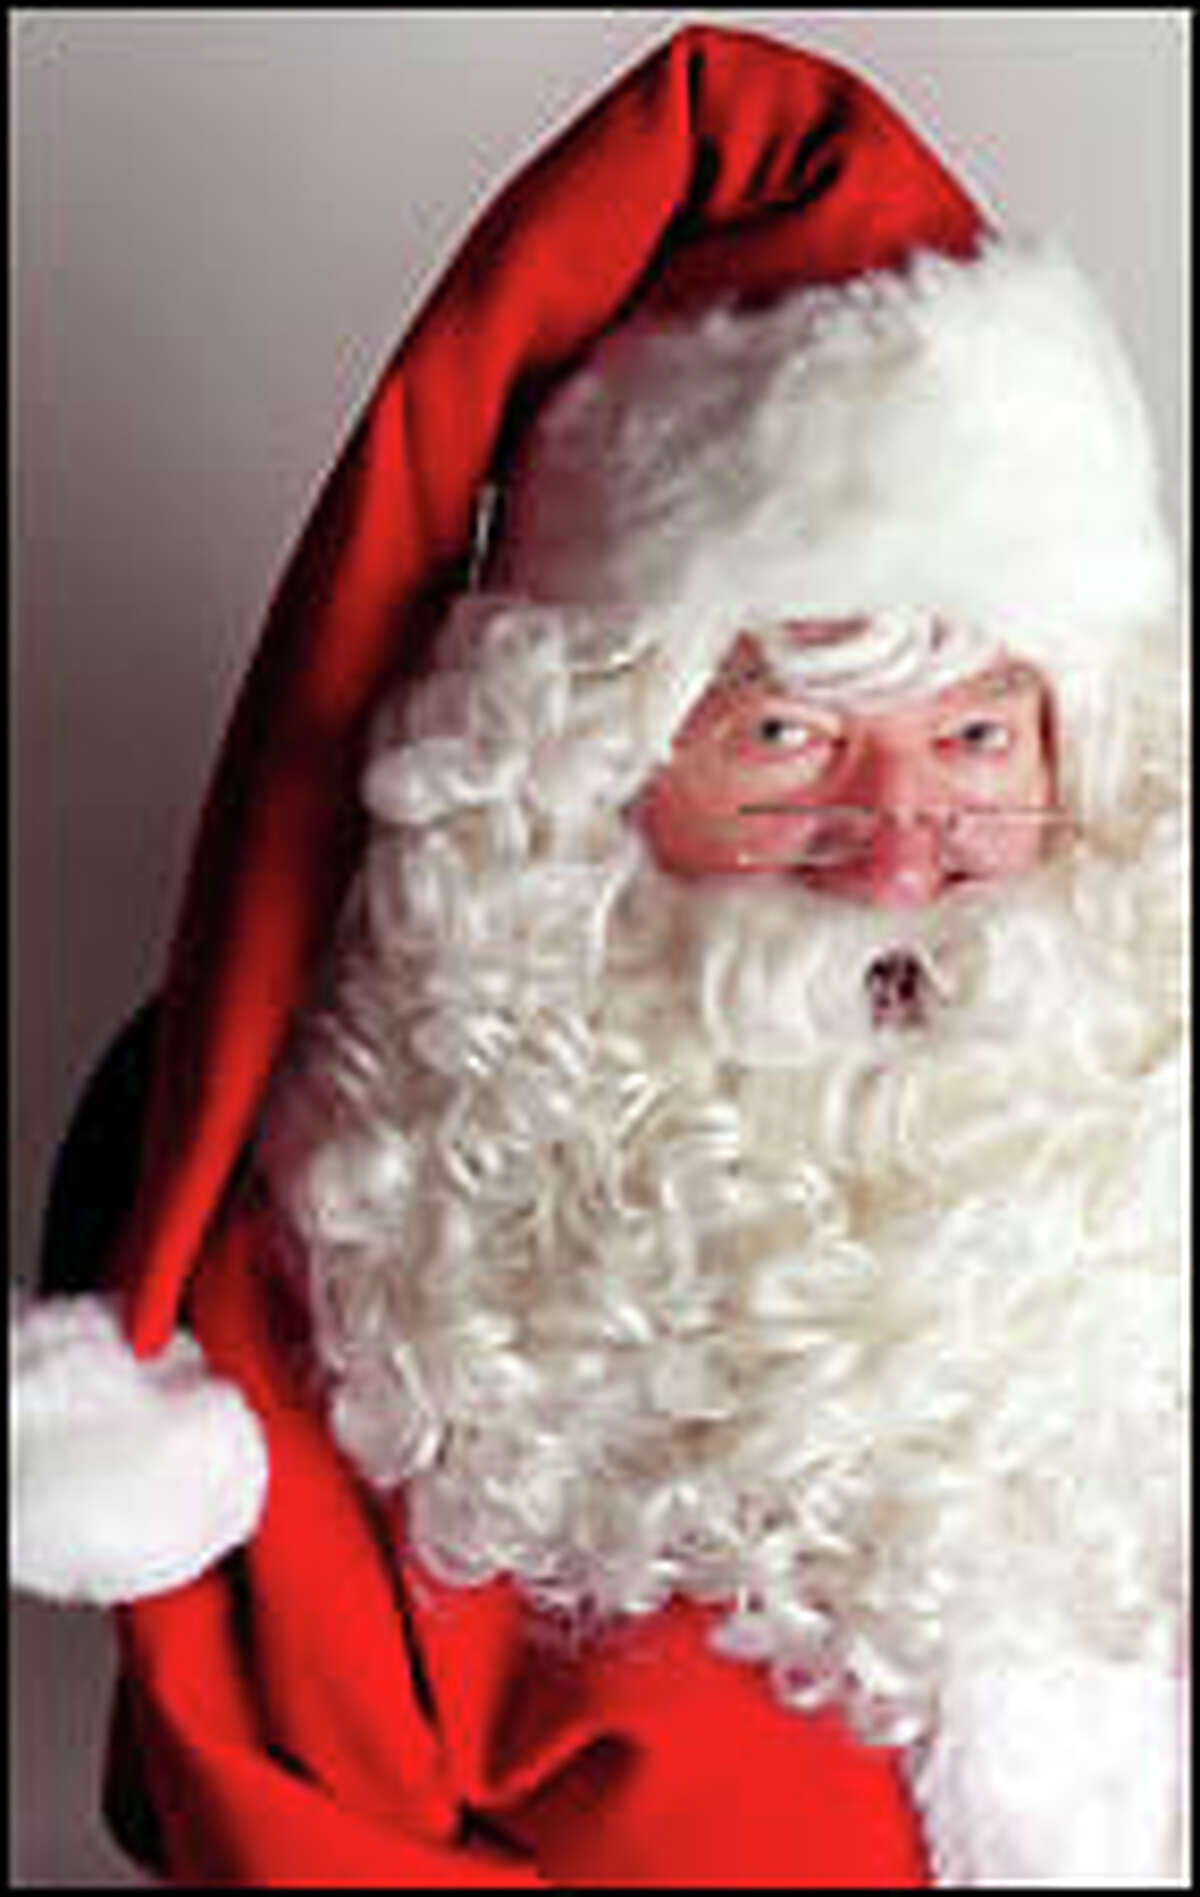 As his jolly alter ego, Bill Knight has discovered that Santa is alive in the hearts of many Seattle residents.